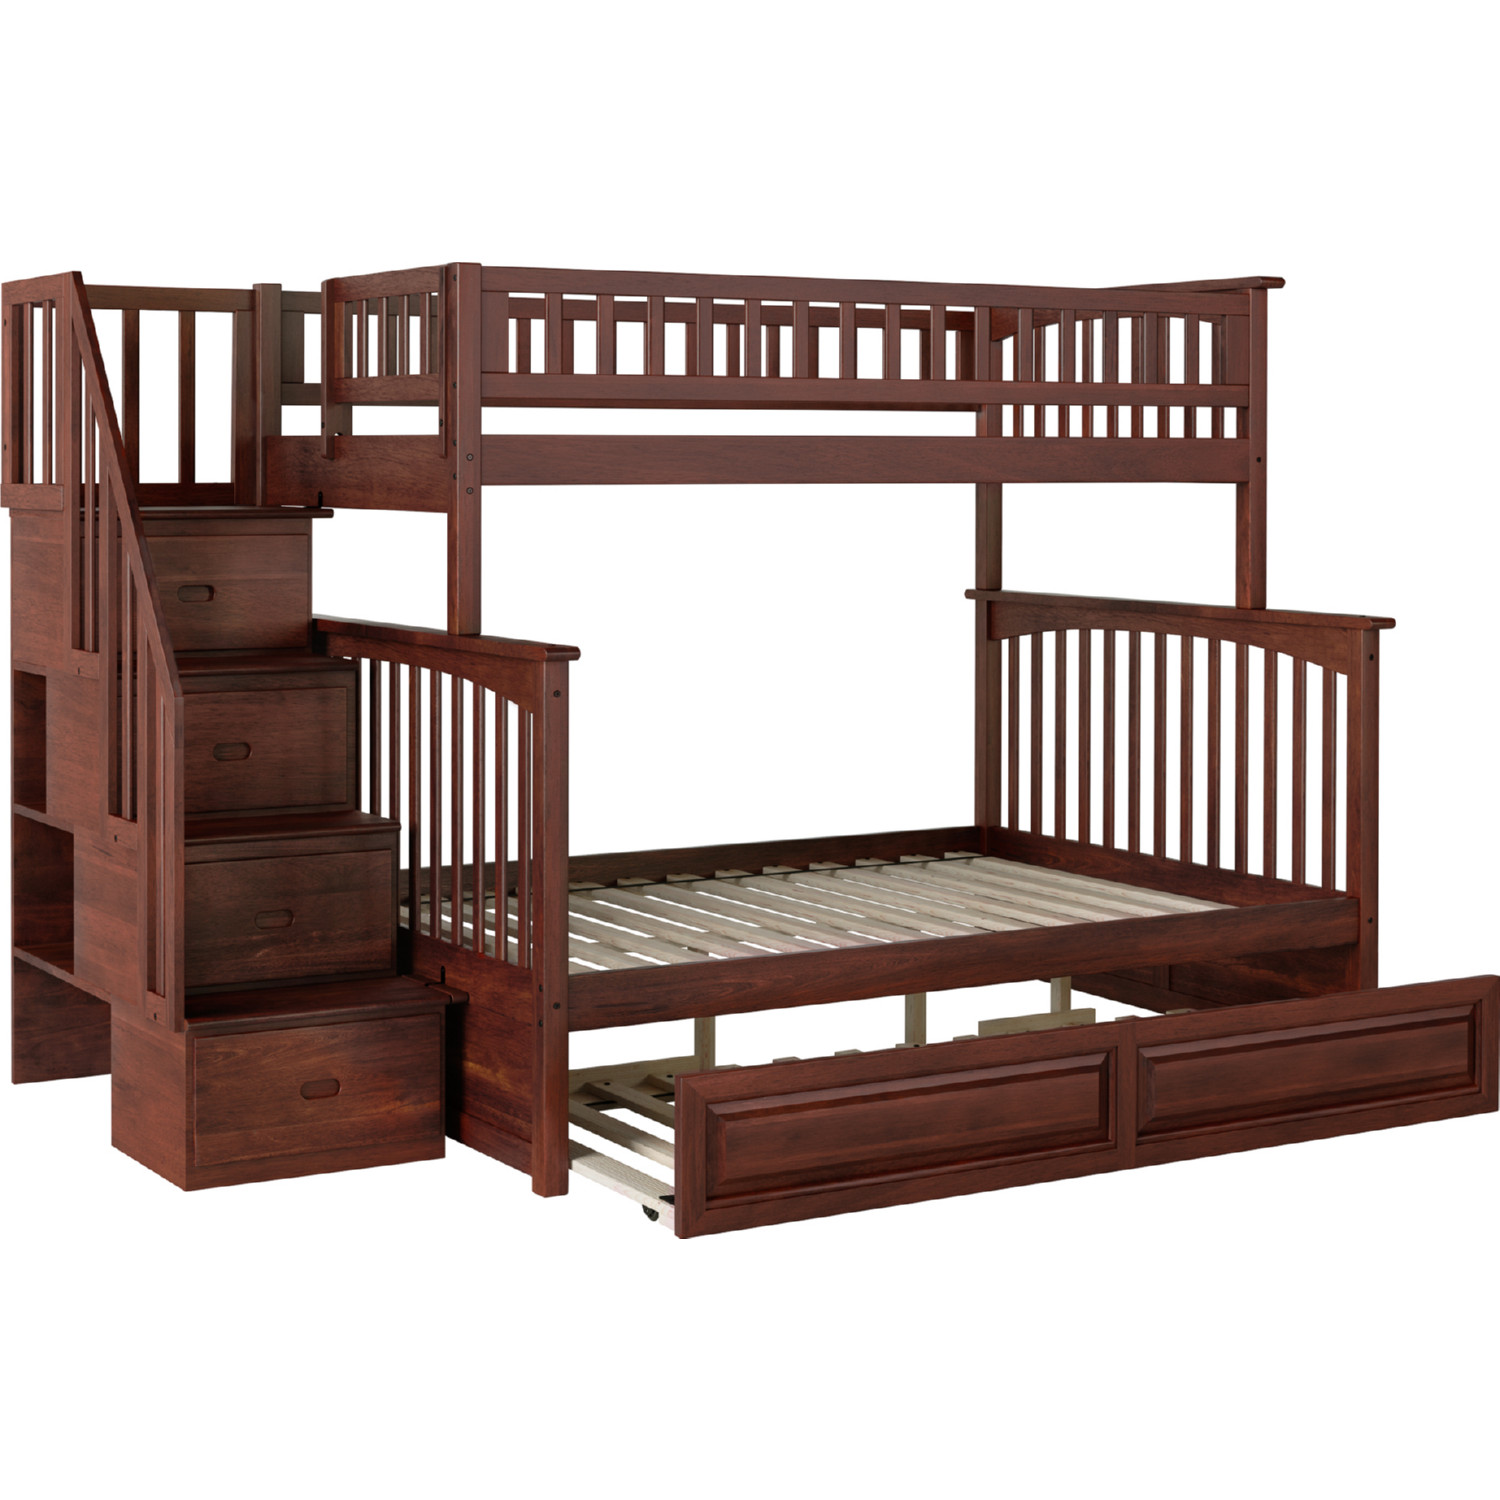 Columbia Staircase Bunk Bed Twin Over Full w/ Raised Panel Trundle in Antique Walnut